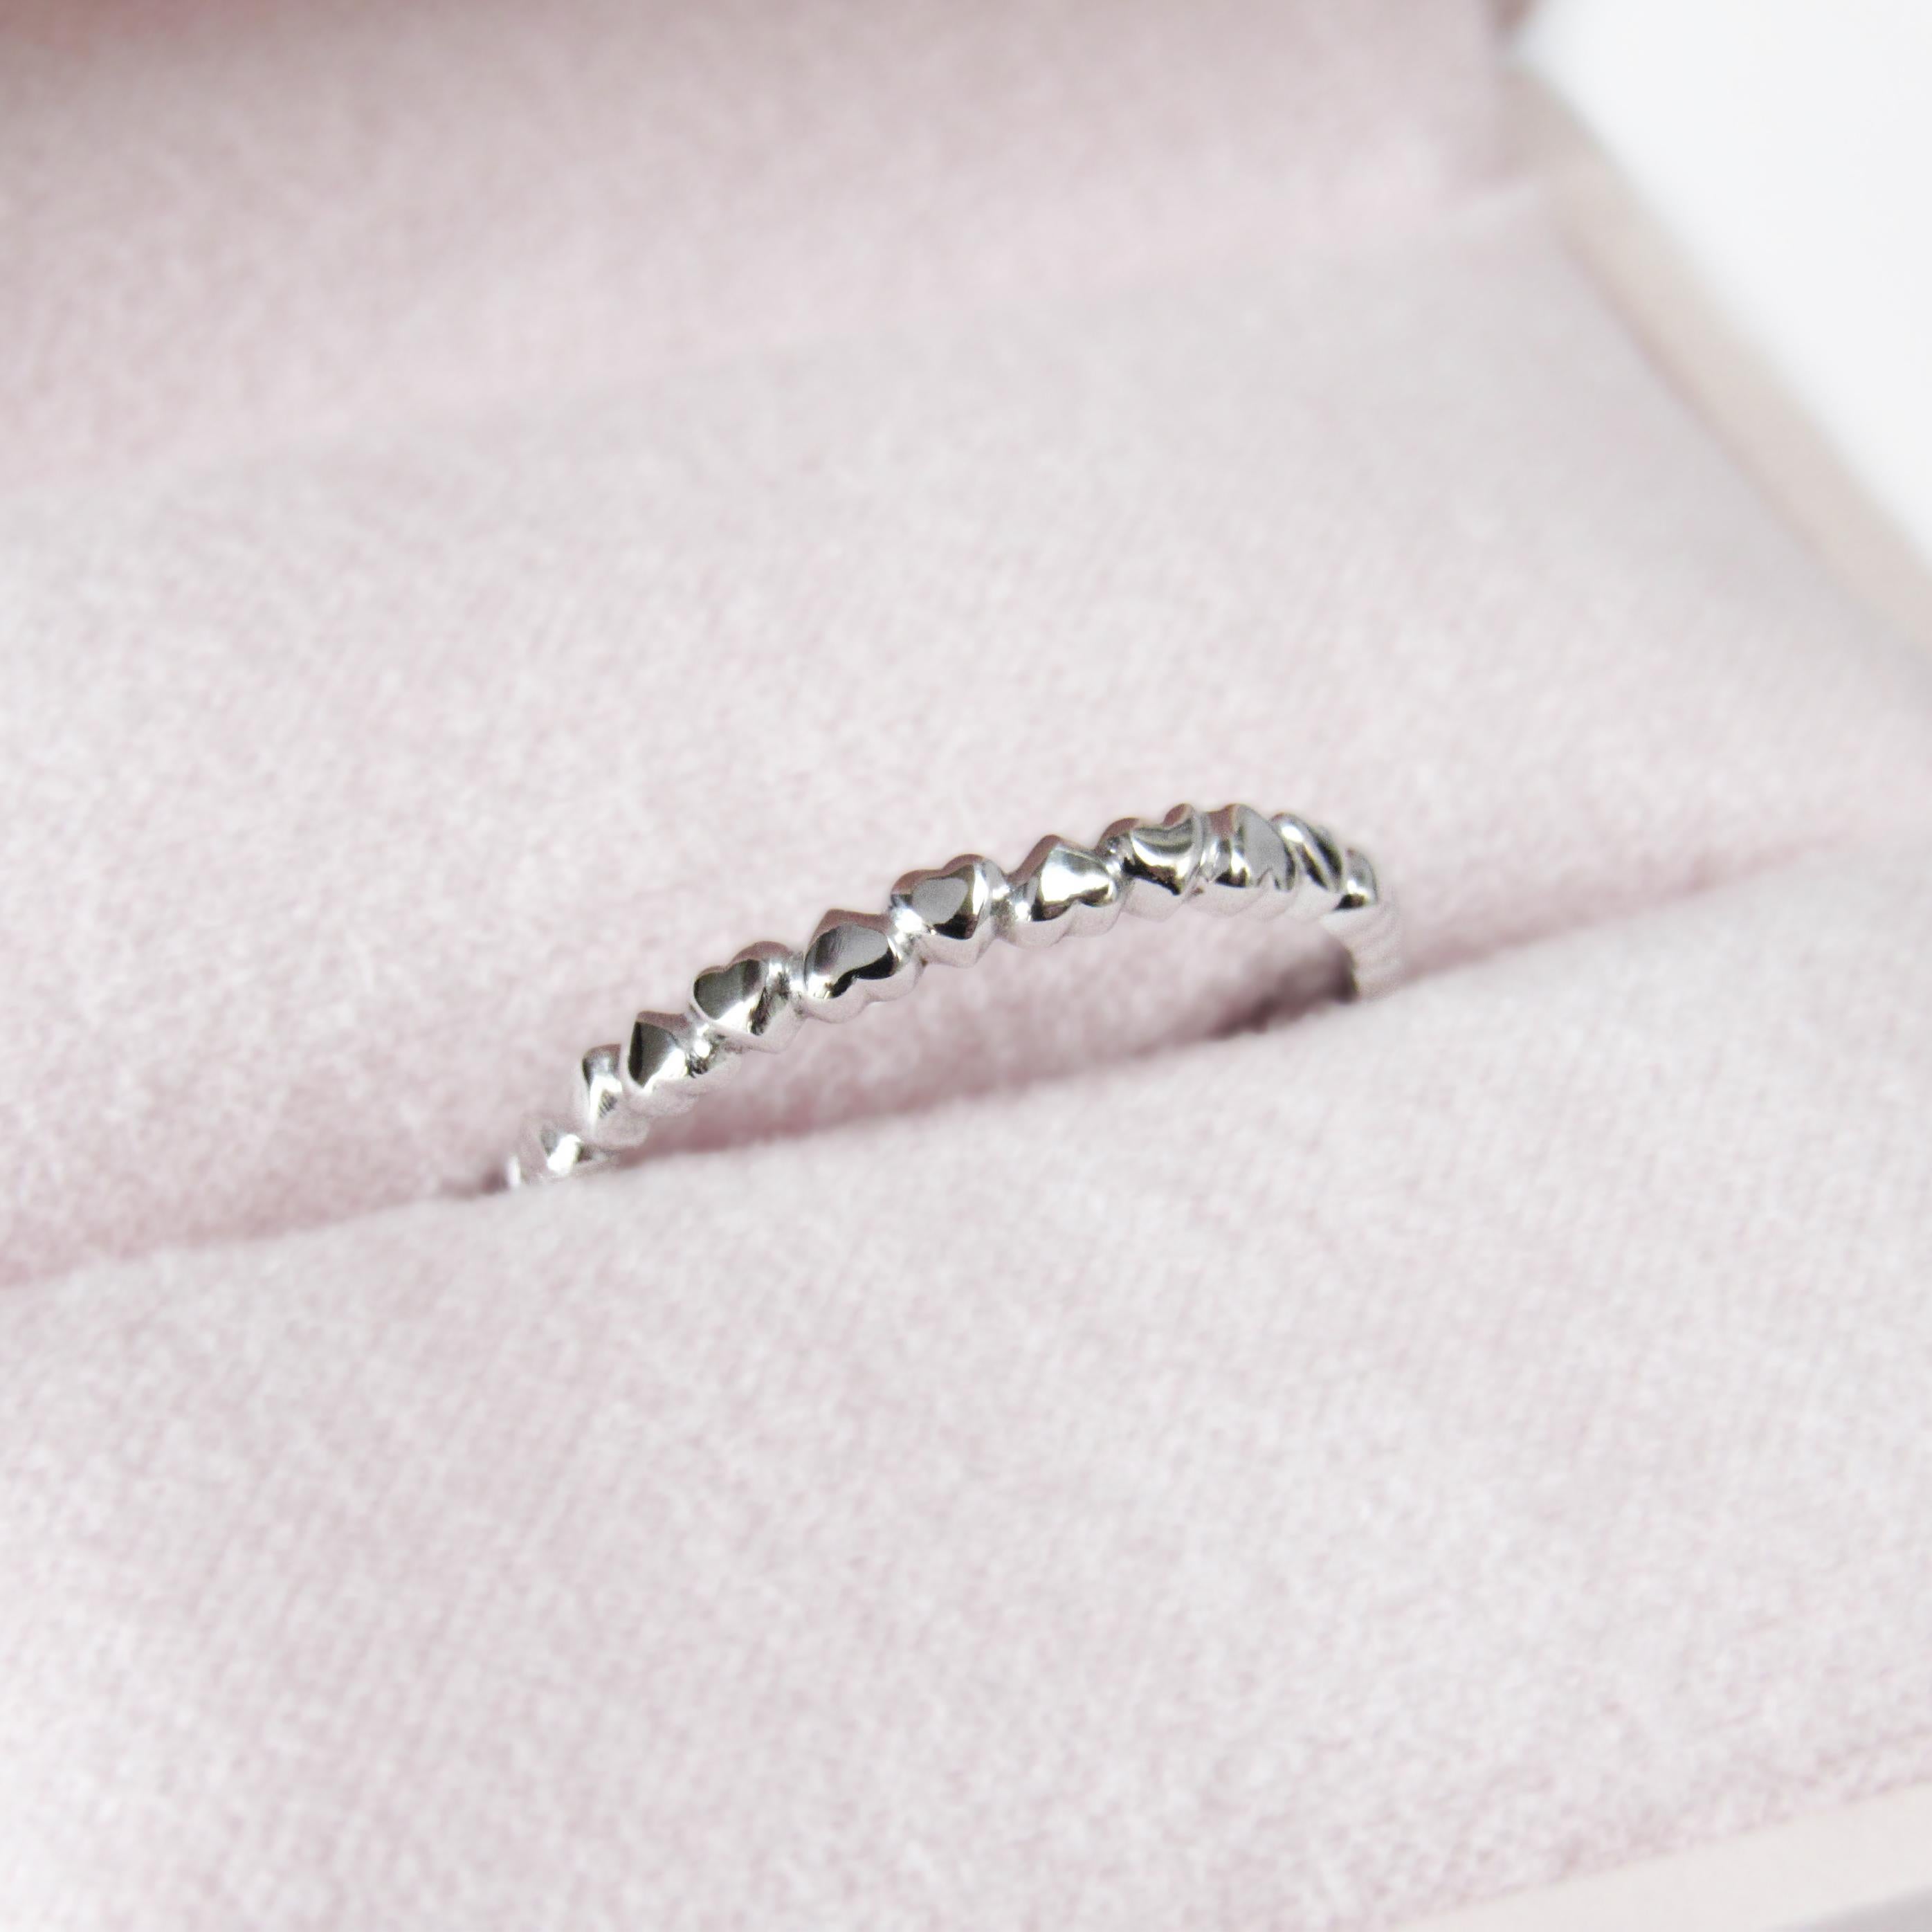 MADE TO ORDER *Please note that we take 20 business days to create your jewel before its ready to ship. Be sure to specify your ring size number.

This 14 karat white gold ring has been designed with hearts interlaced throughout the whole ring.